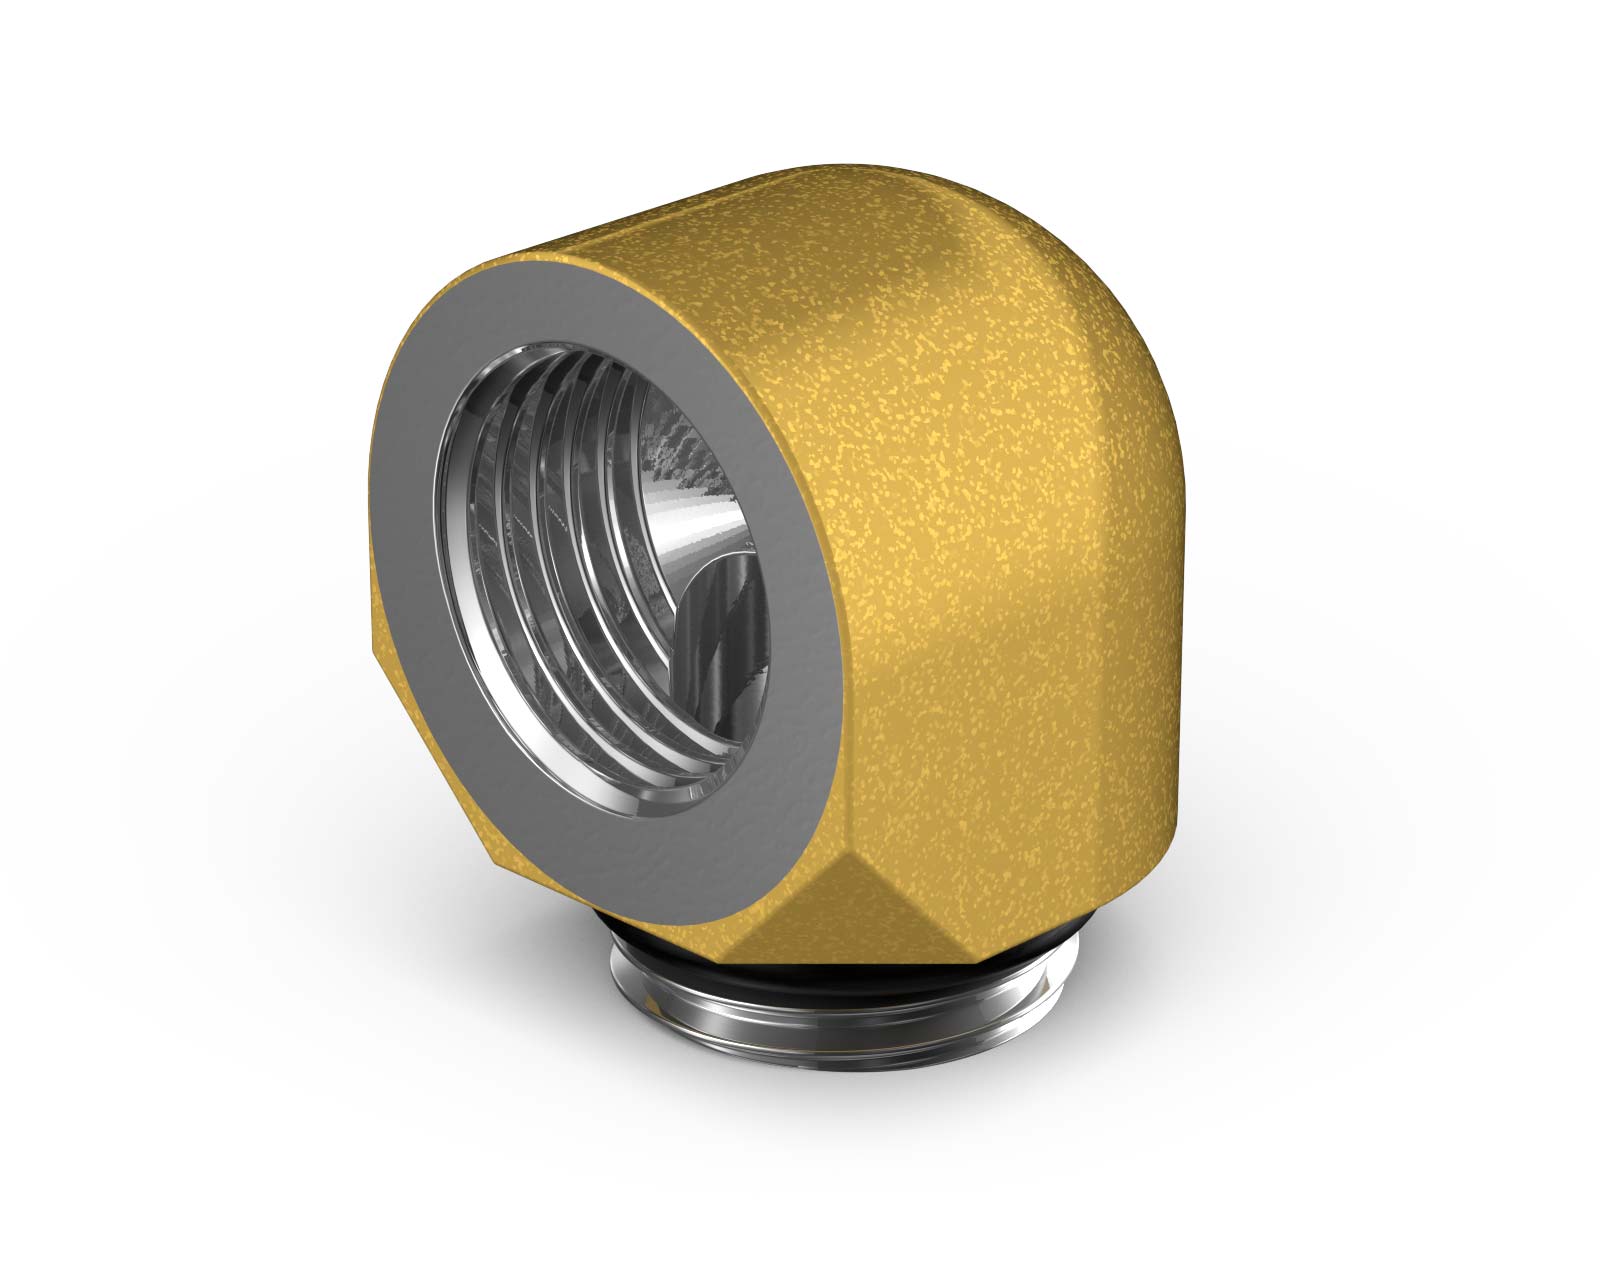 PrimoChill Male to Female G 1/4in. 90 Degree SX Elbow Fitting - PrimoChill - KEEPING IT COOL Gold